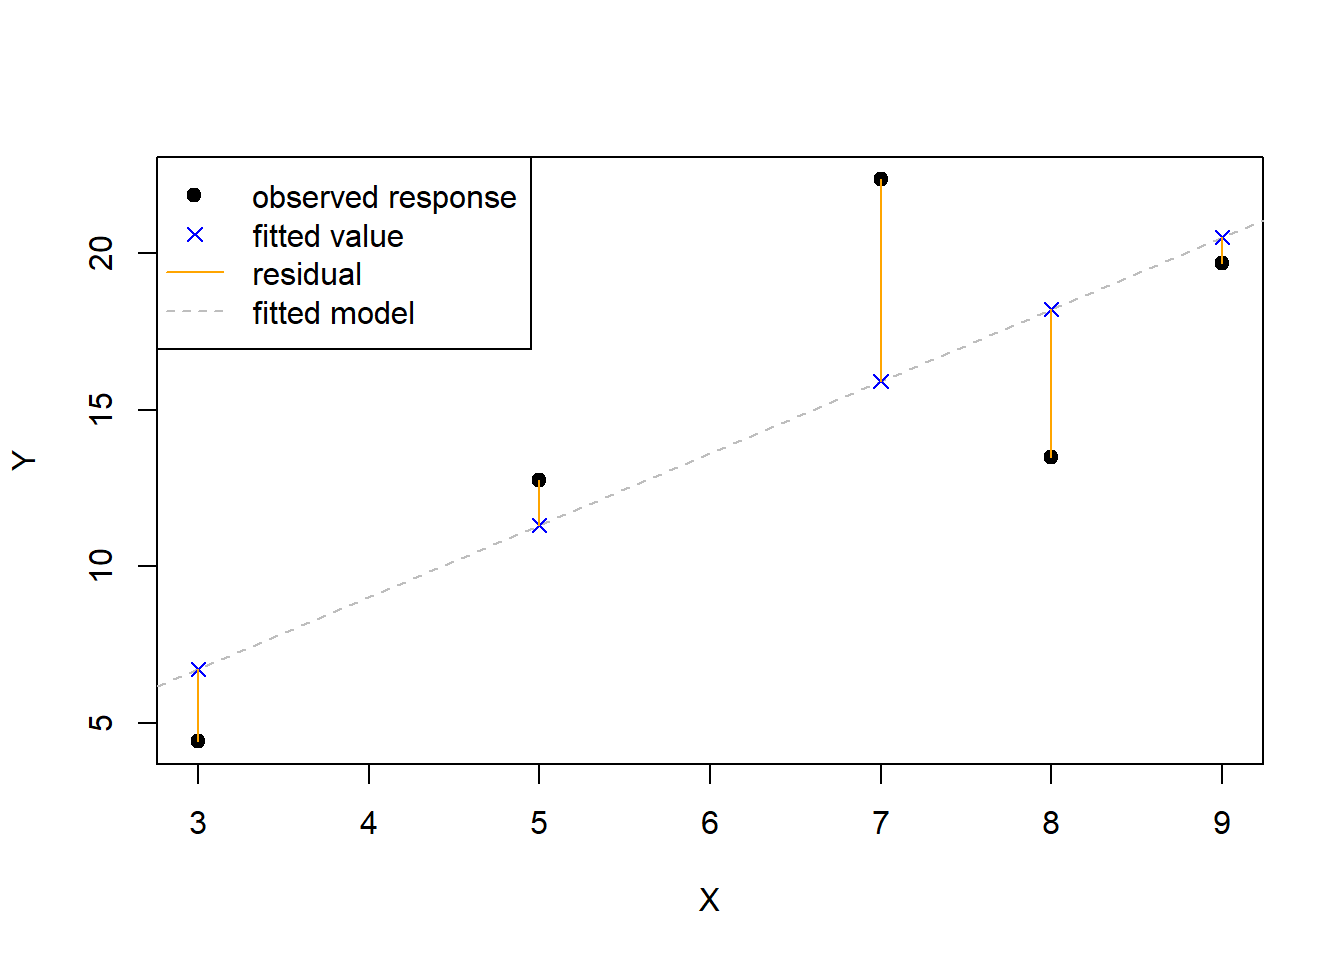 Visualization of the fitted model, response values, fitted values, and residuals.